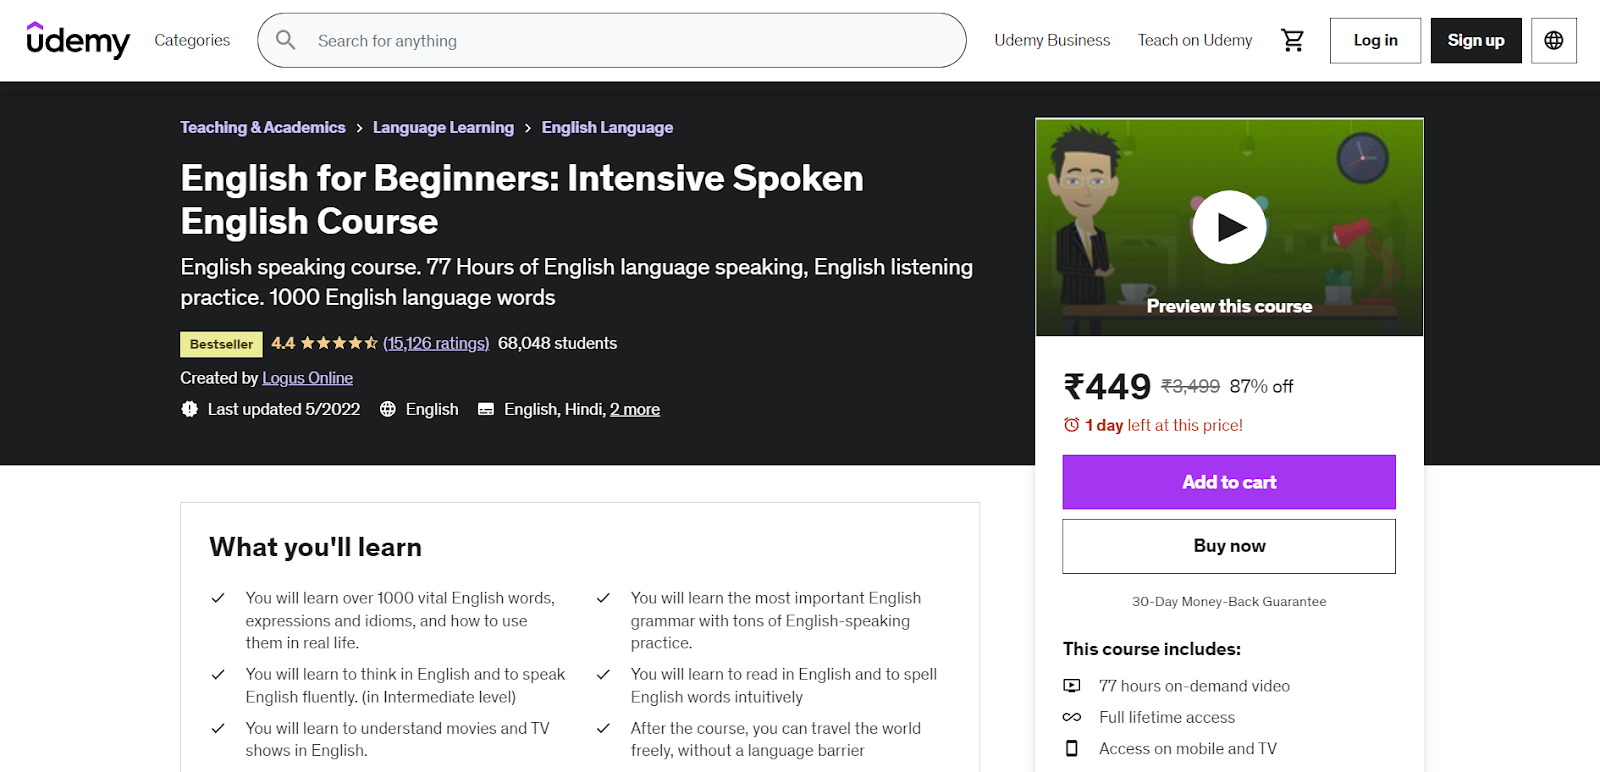 Unleash Your Full Potential In English - udemy-screenshot